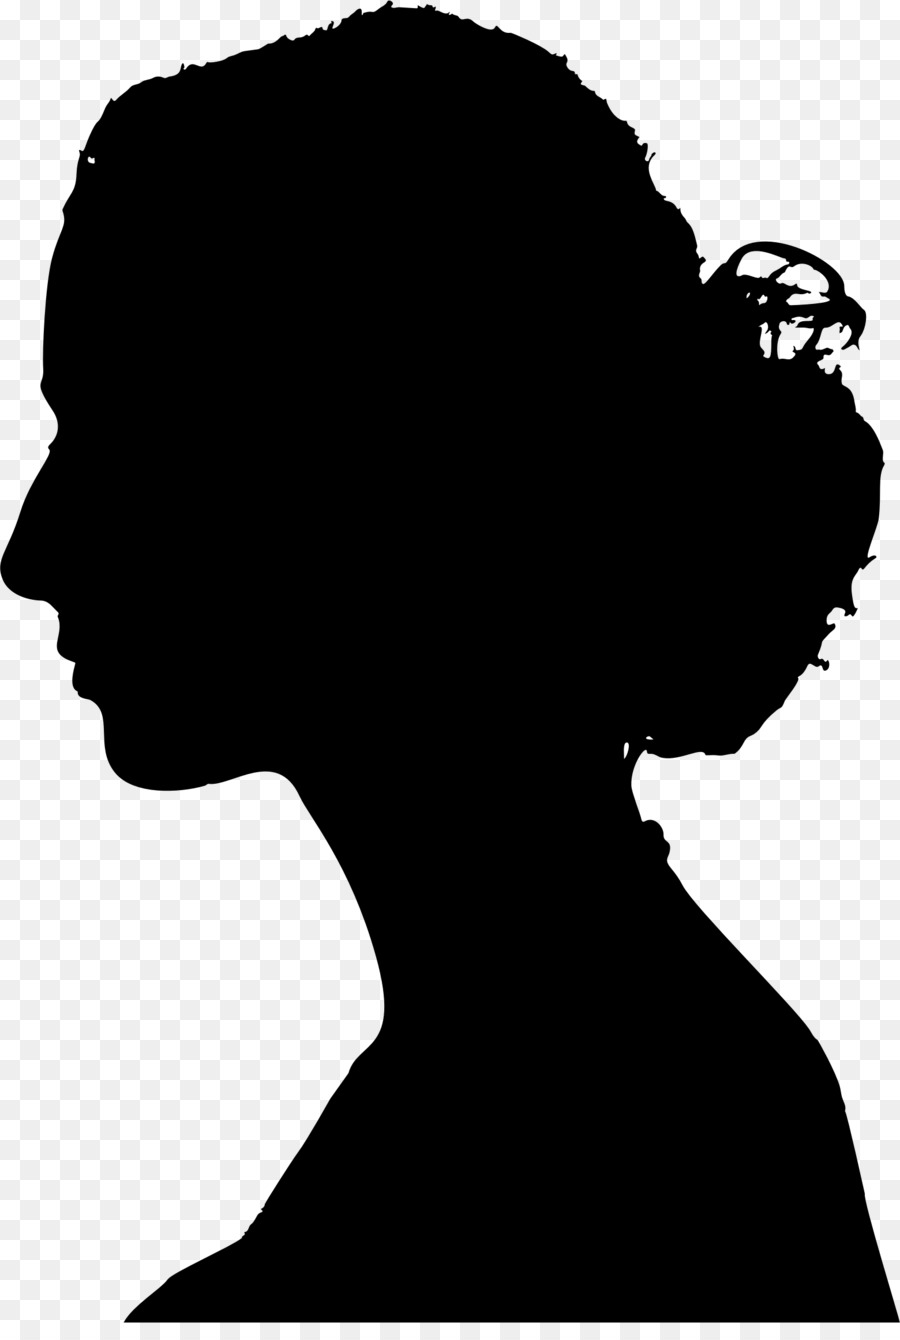 Female Woman Clip art - Profile png download - 1560*2294 - Free Transparent Female png Download.